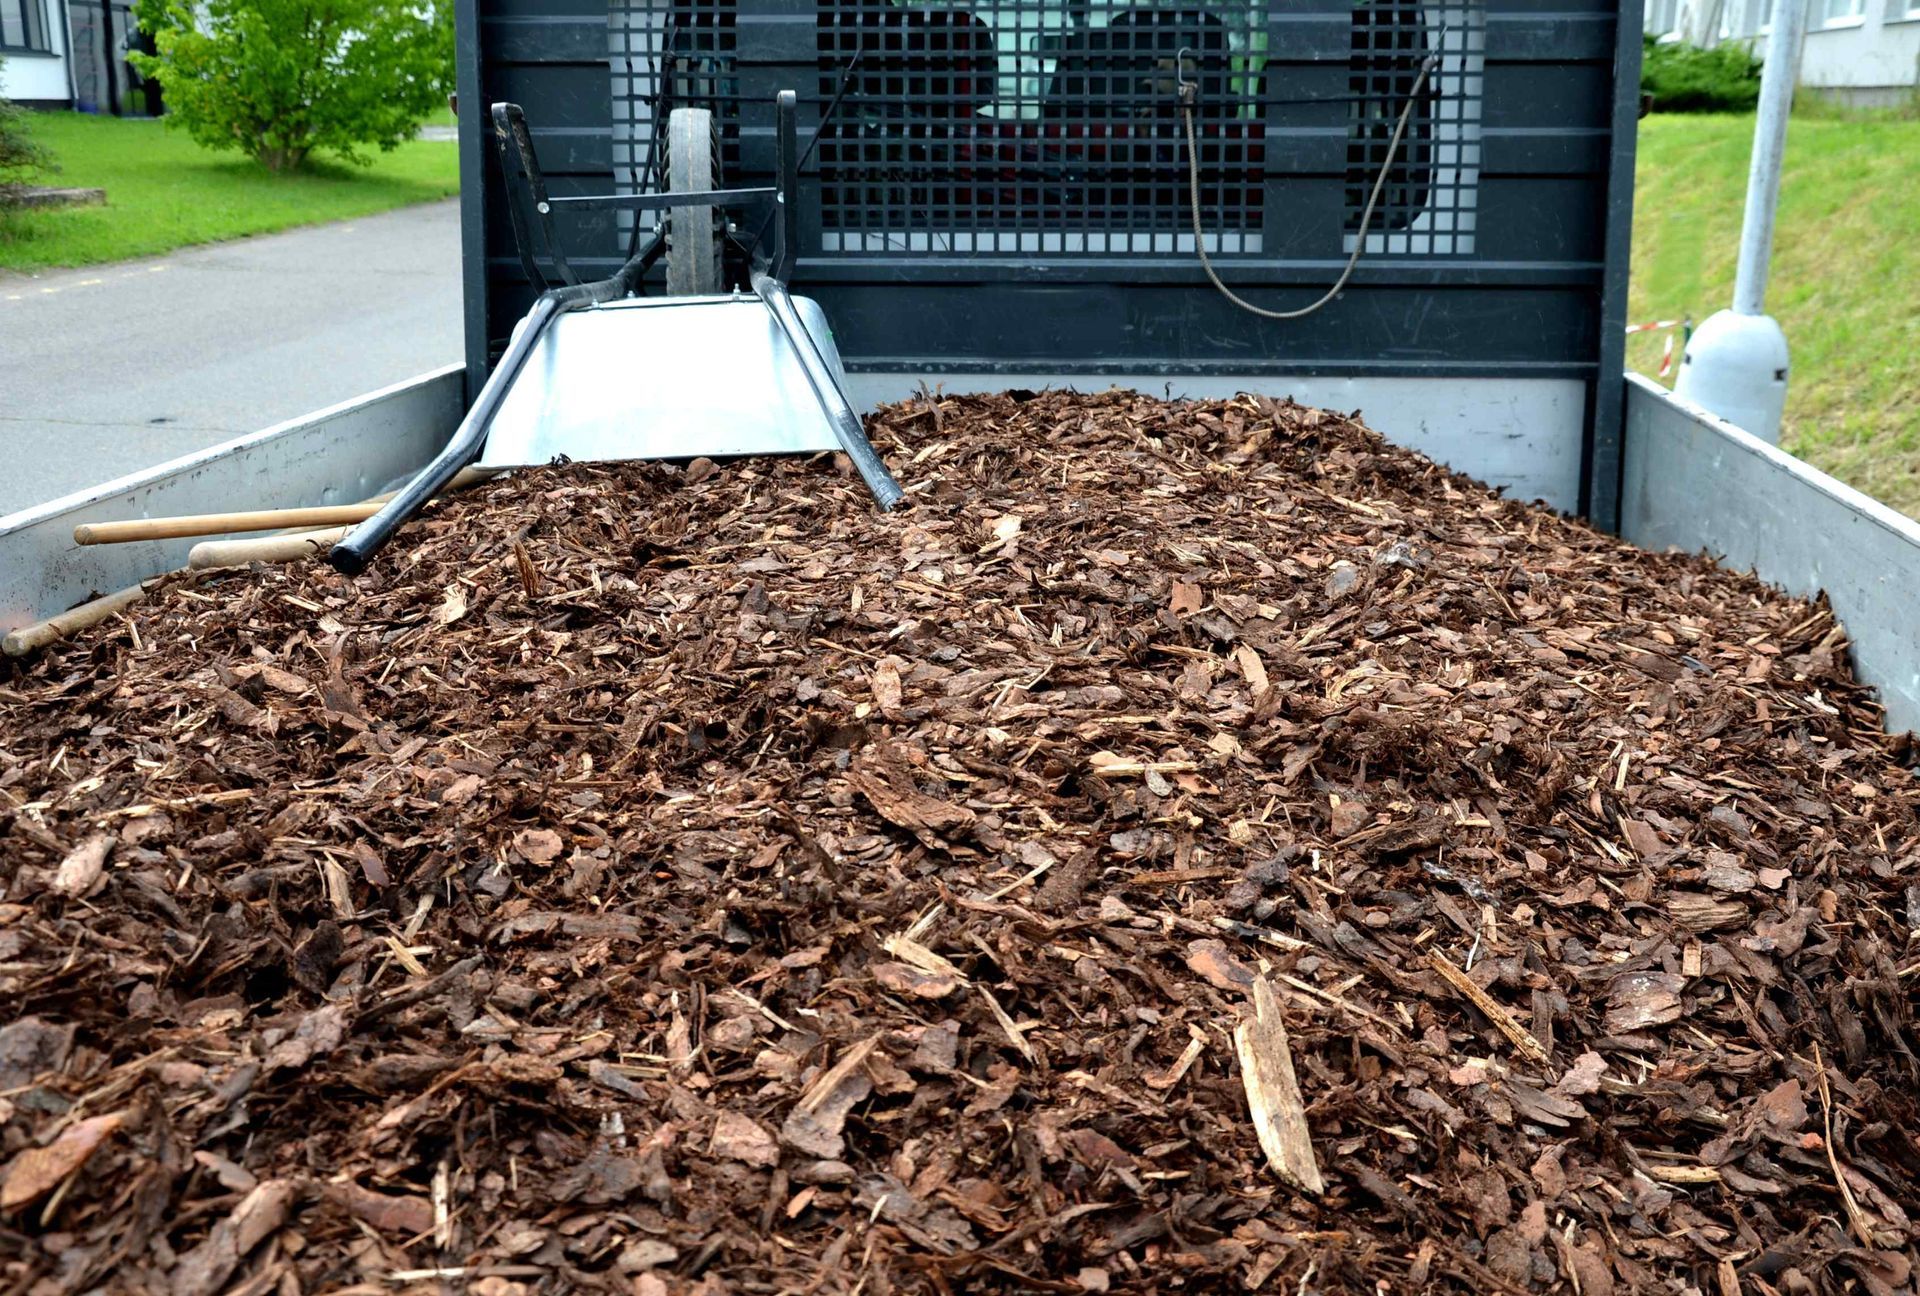 Brown mulch chips in back of truck